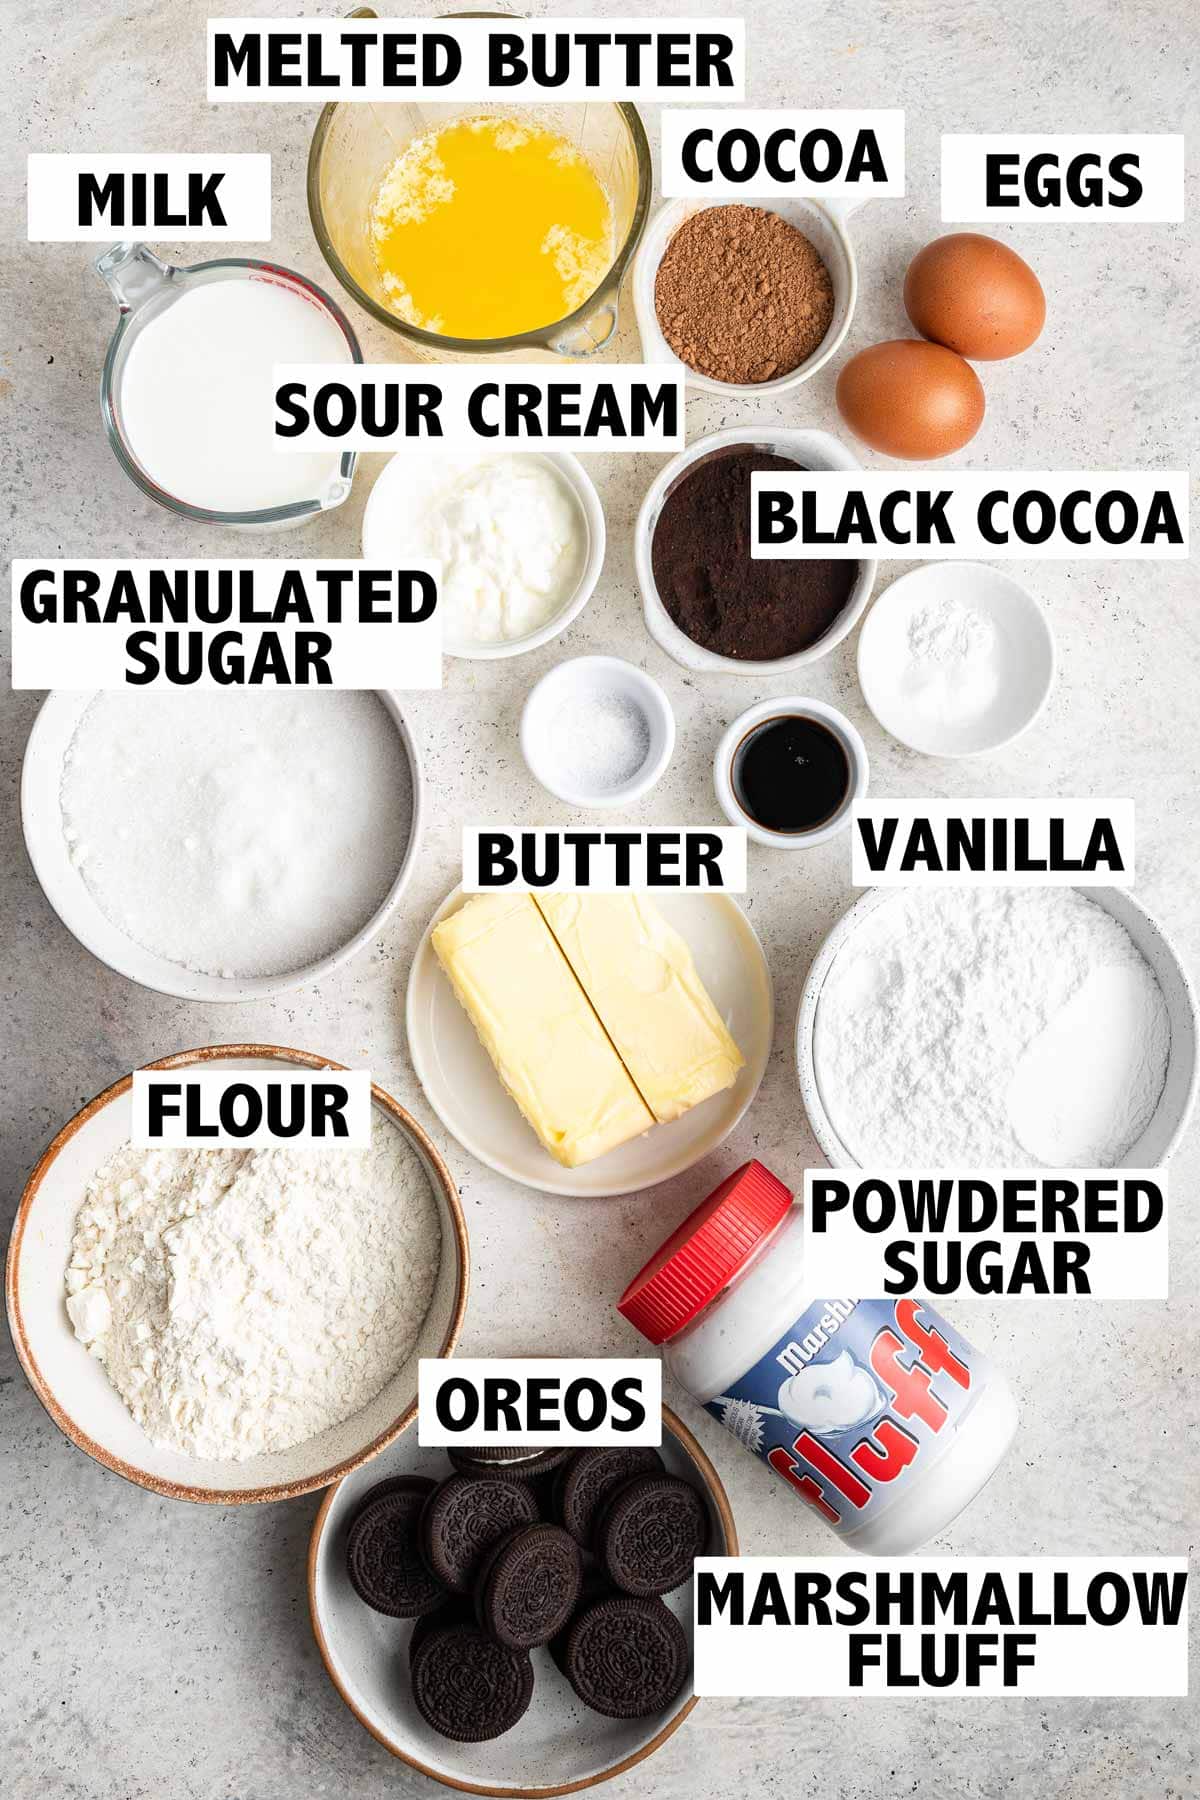 ingredients needed to make an oreo bundt cake with marshmallow frosting